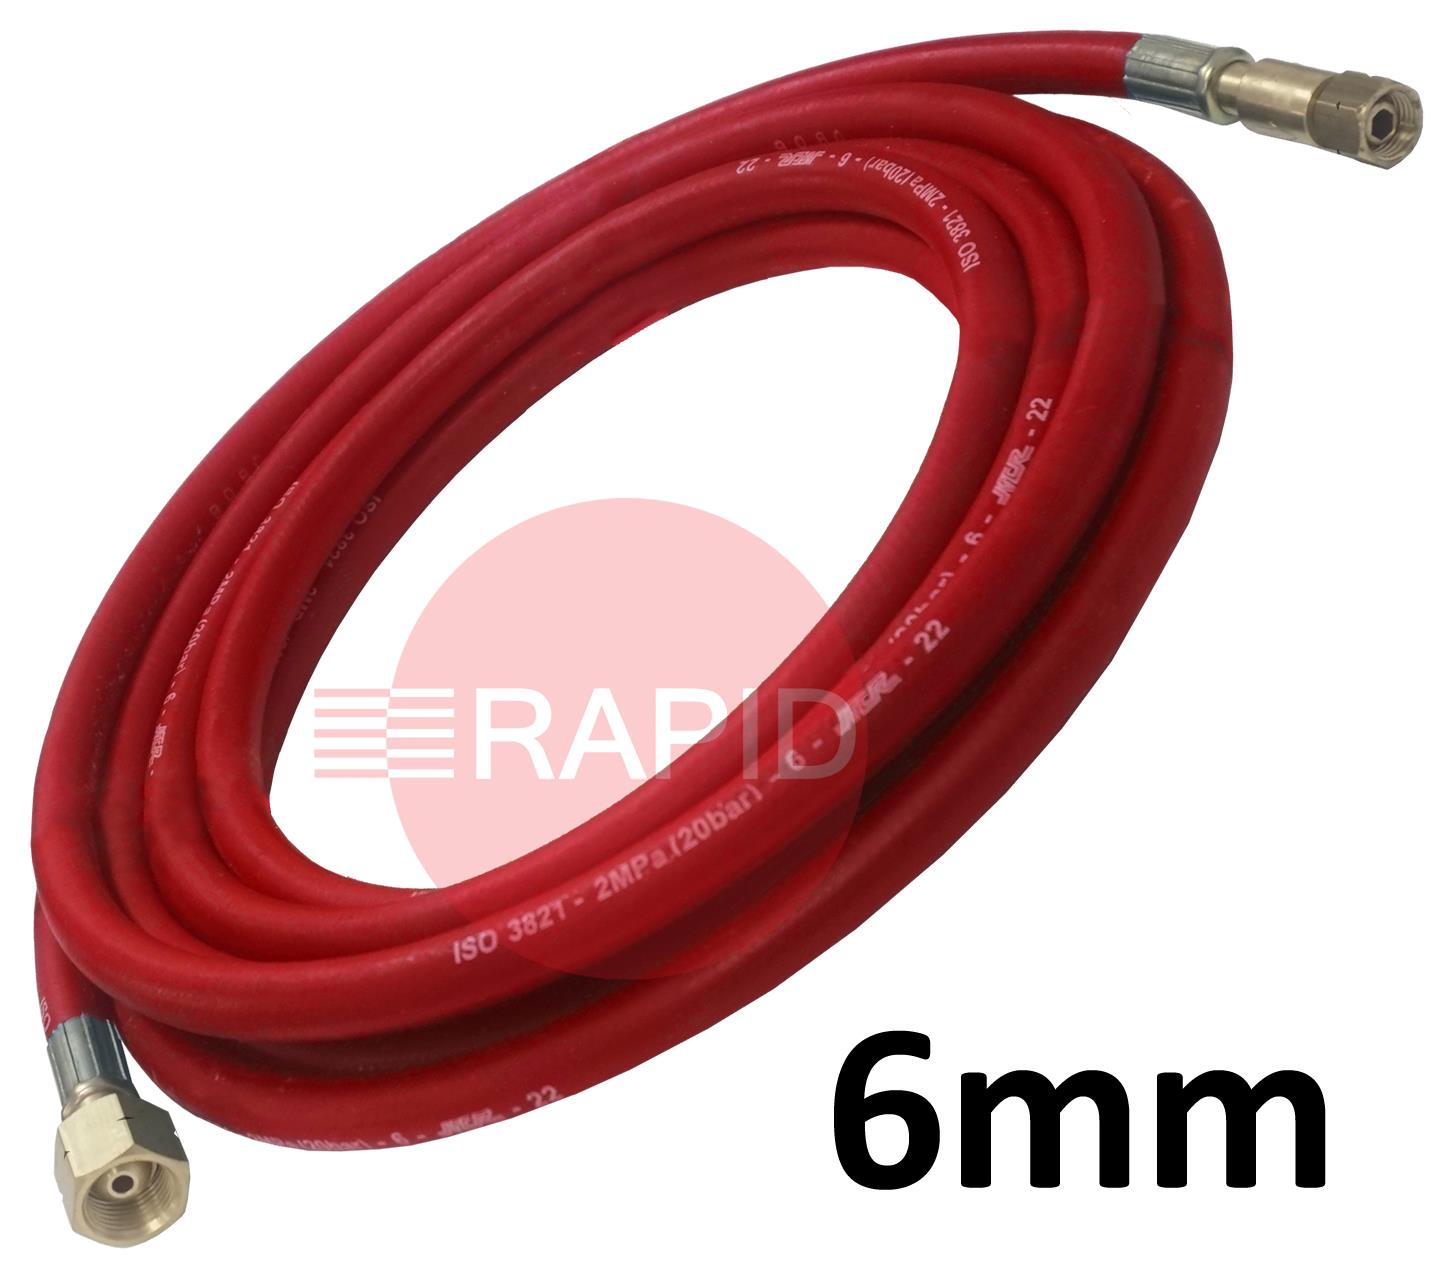 A5122  Fitted Acetylene Hose. 6mm Bore. G1/4 Check Valve & G3/8 Regulator Connection - 20m